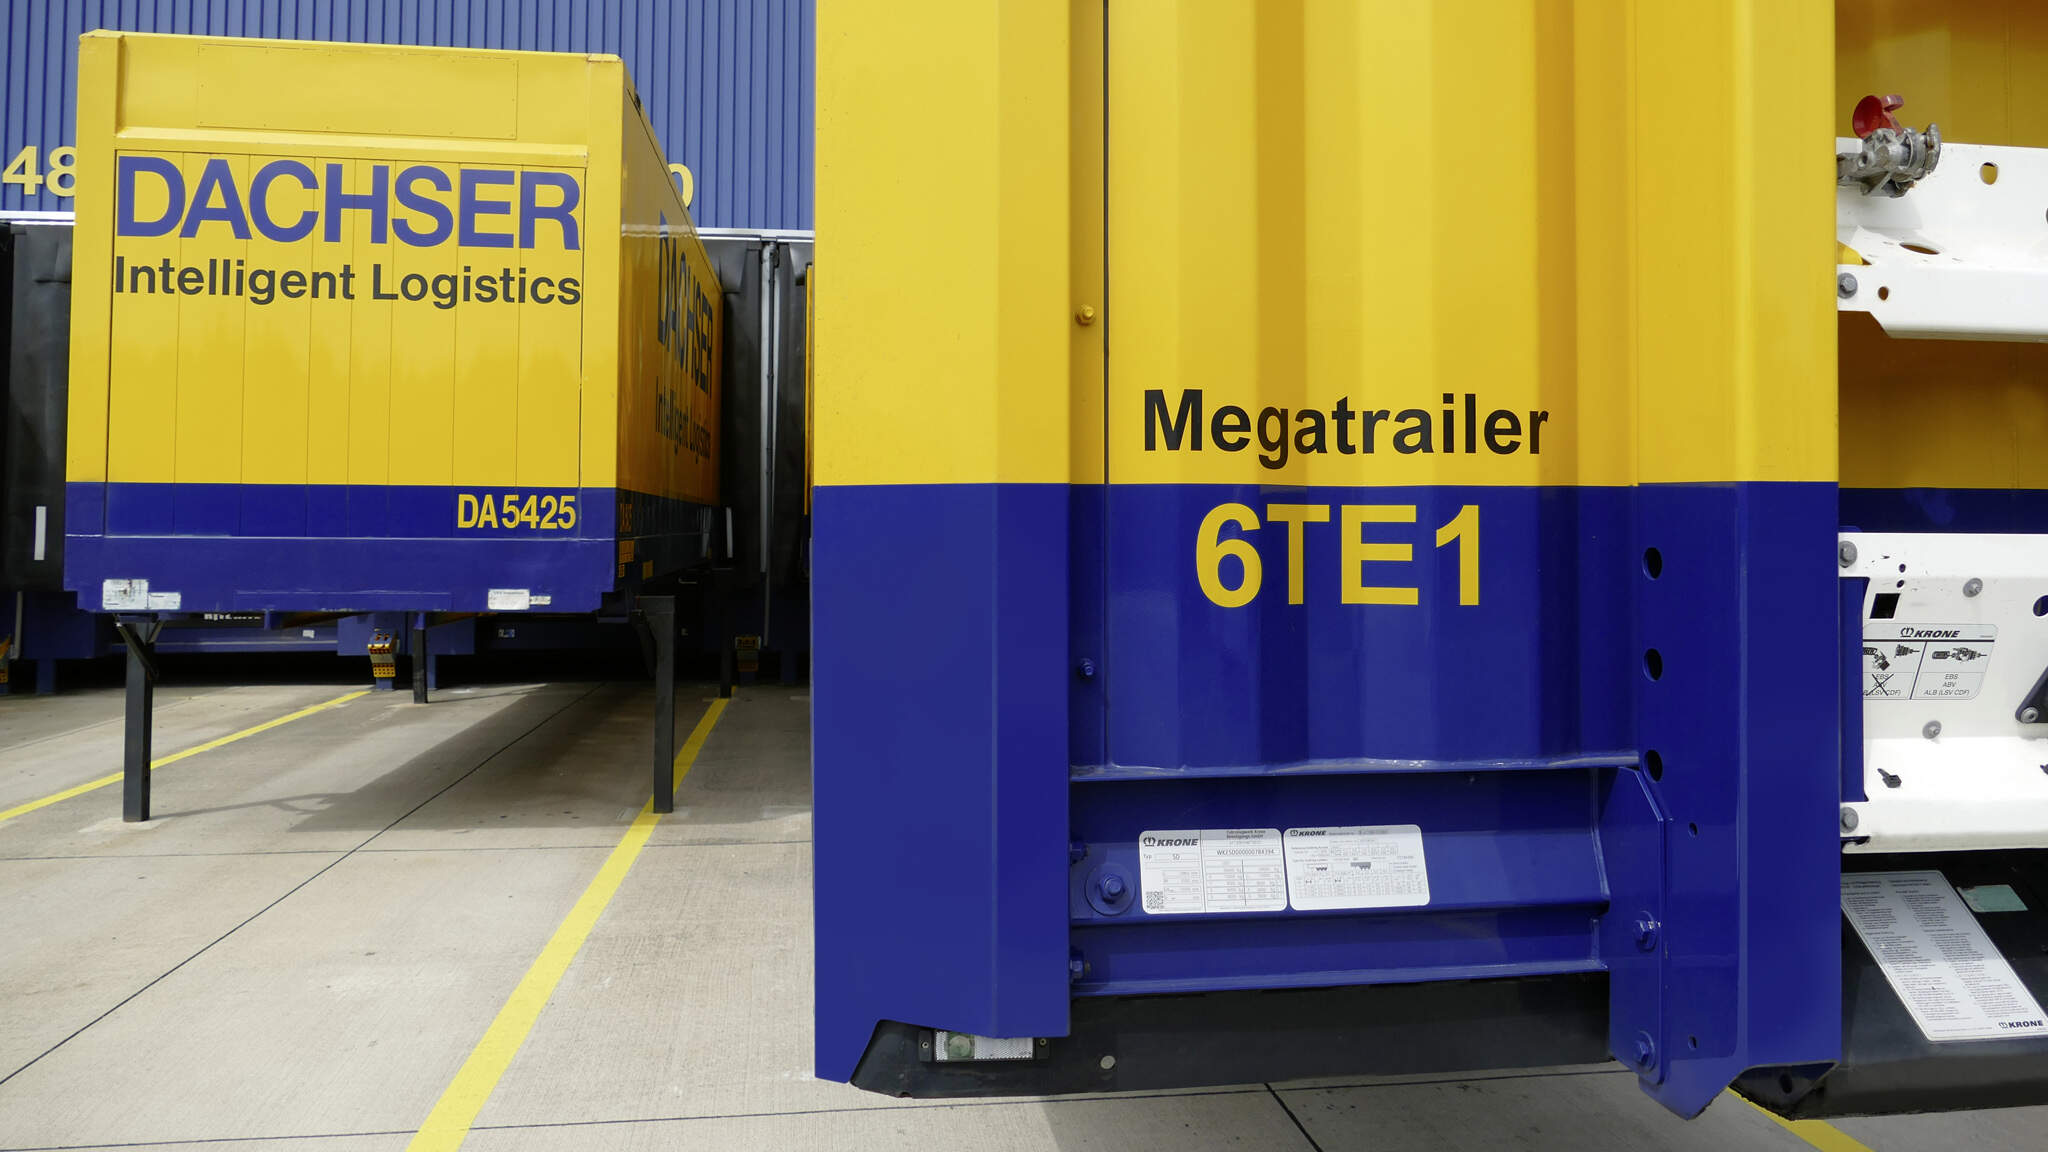 Successive conversion of semitrailers in the European Logistics business line optimizes capacity utilisation and at the same time improves the climate footprint of transports.